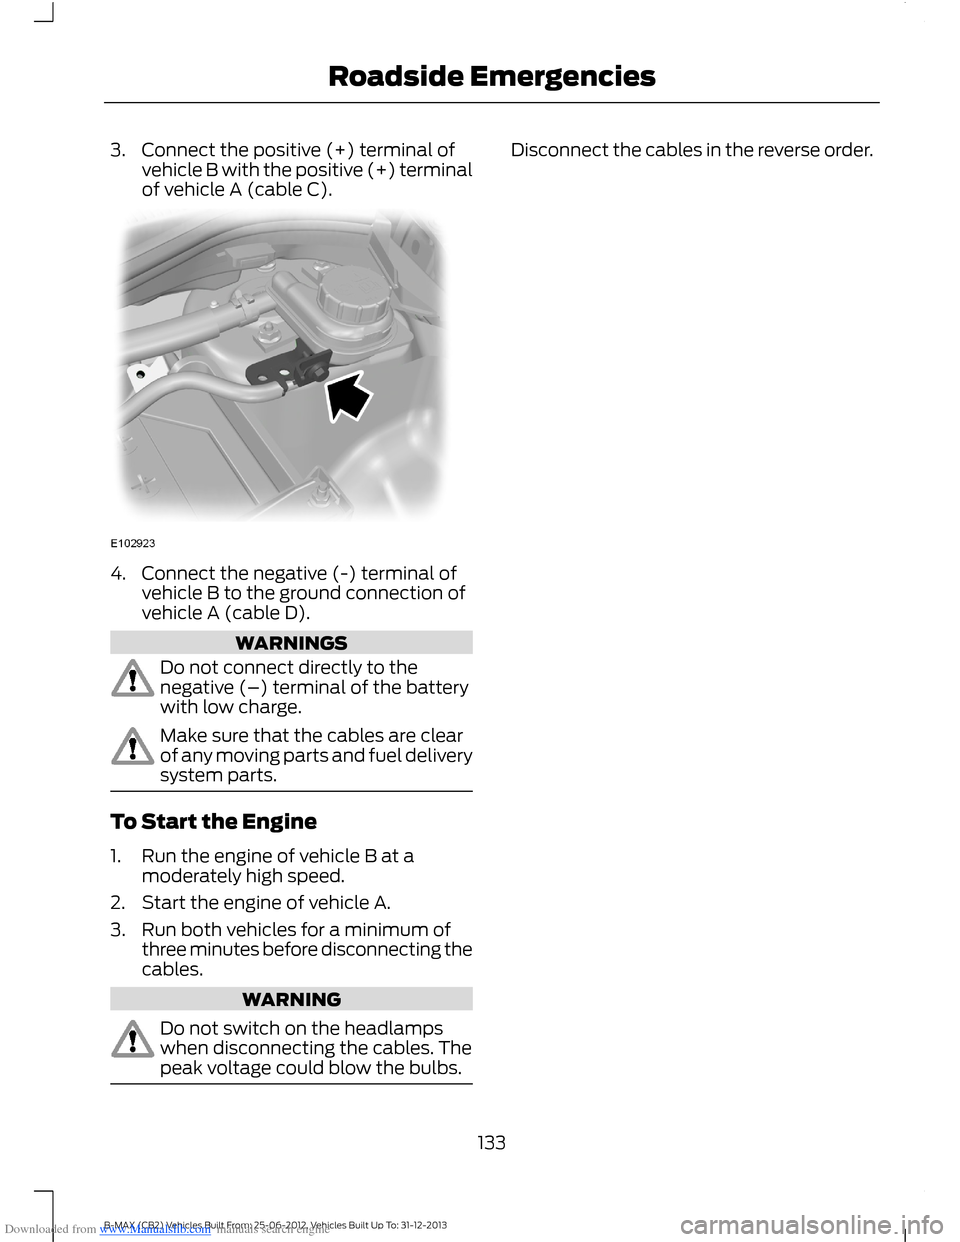 FORD B MAX 2013 1.G Owners Manual Downloaded from www.Manualslib.com manuals search engine 3.Connect the positive (+) terminal ofvehicle B with the positive (+) terminalof vehicle A (cable C).
4.Connect the negative (-) terminal ofveh